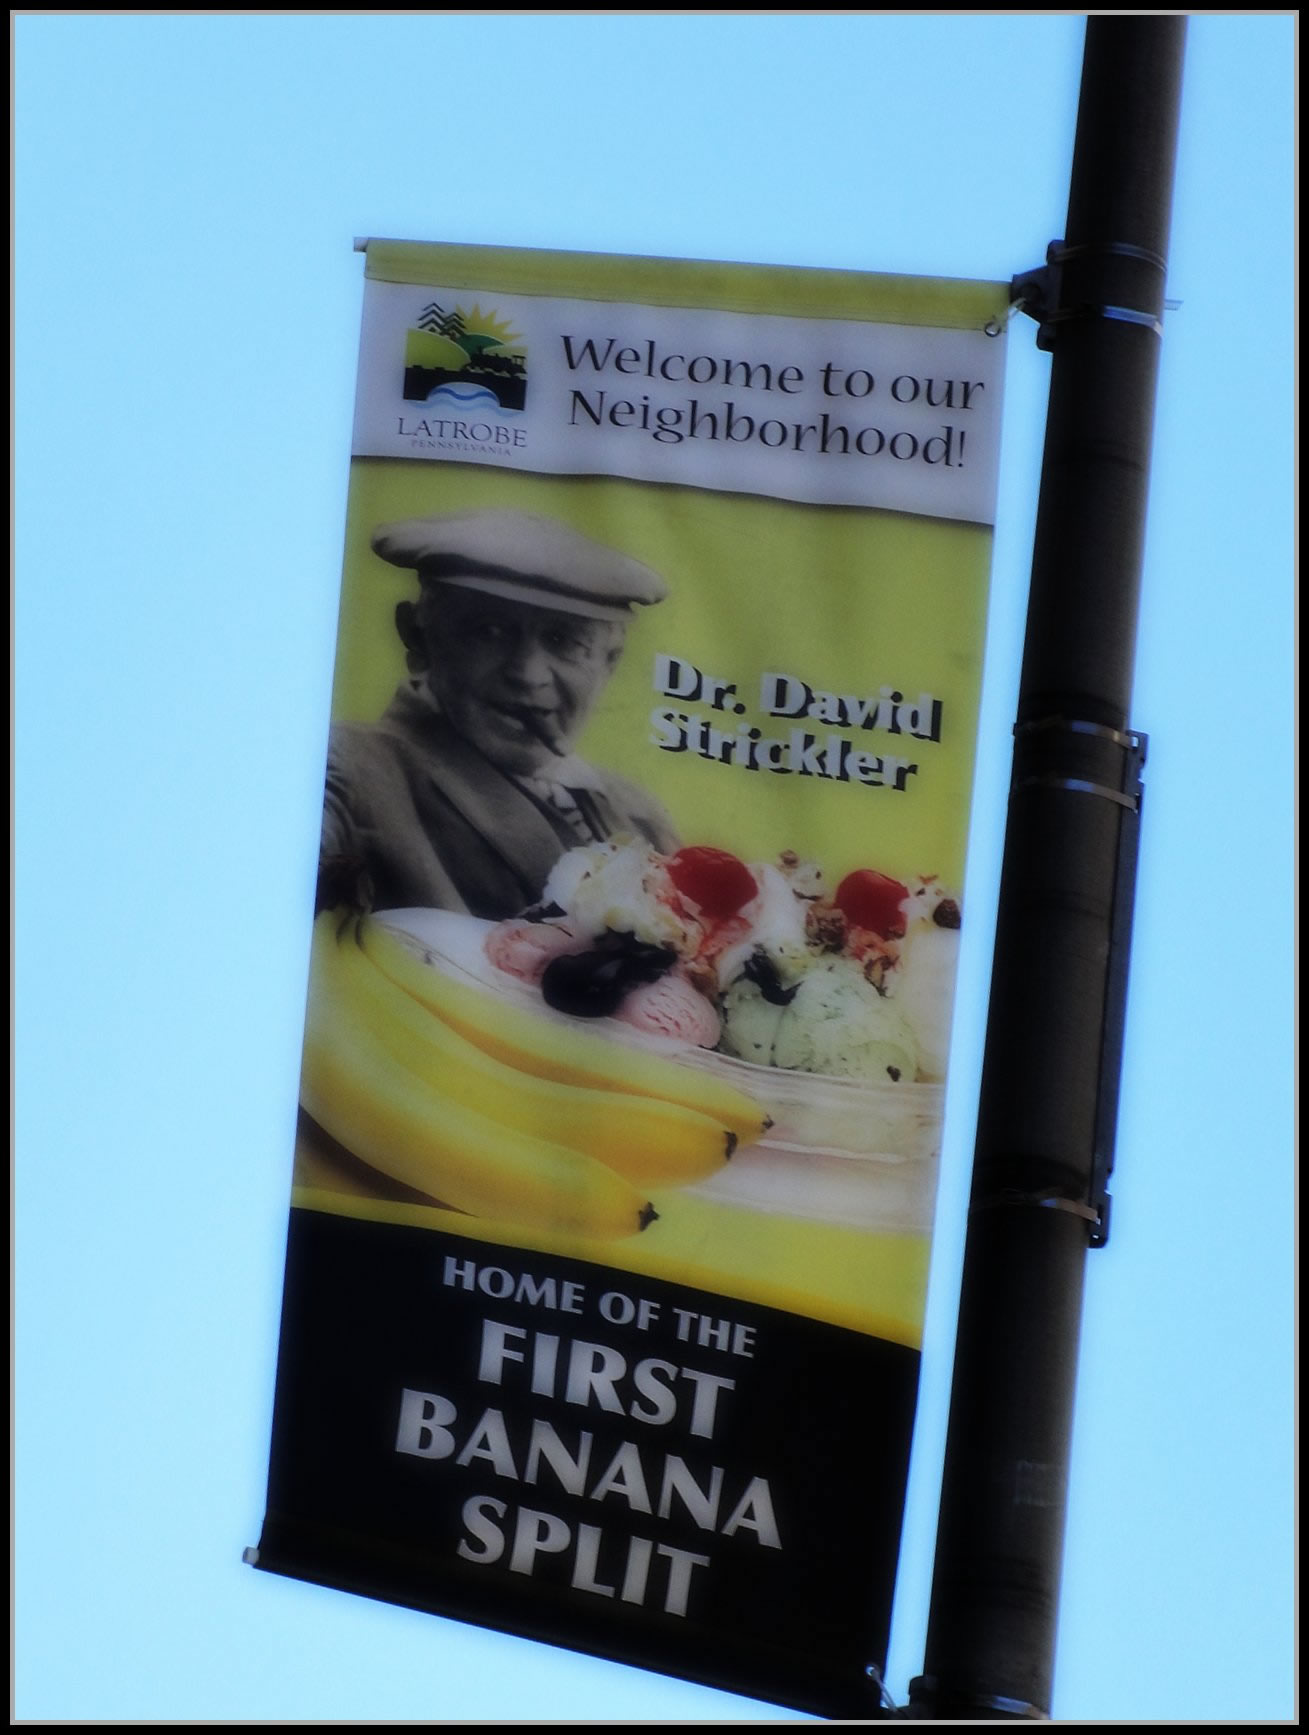 A banner in Latrobe boasting of being the home of the banana split